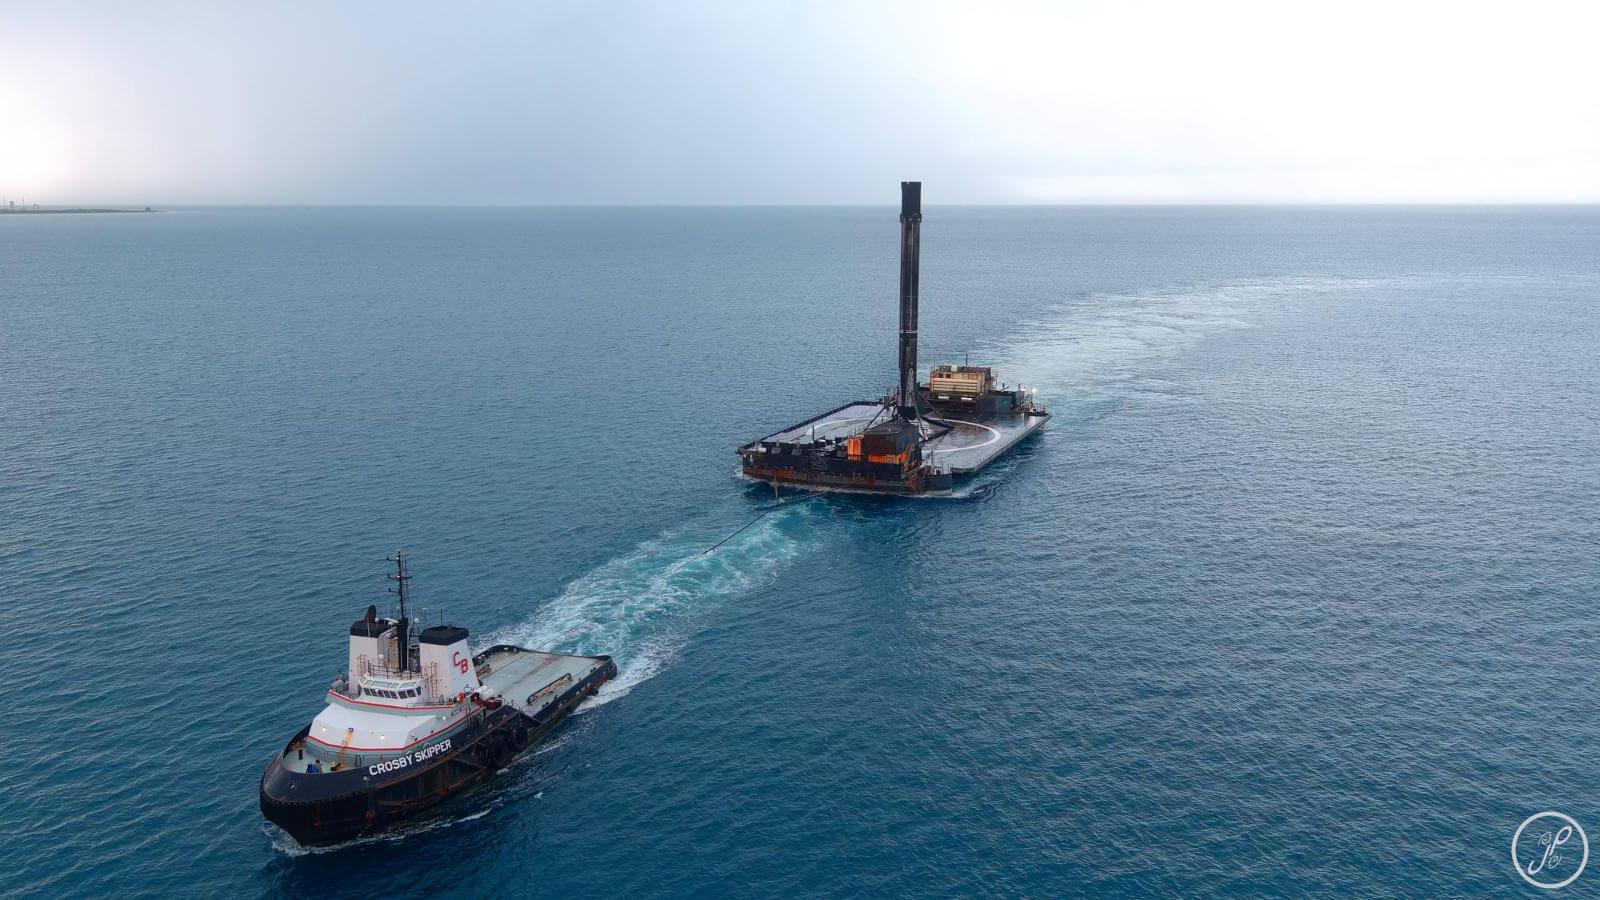 A stage of SpaceX's Falcon 9 launcher returns to port... for the 16th time